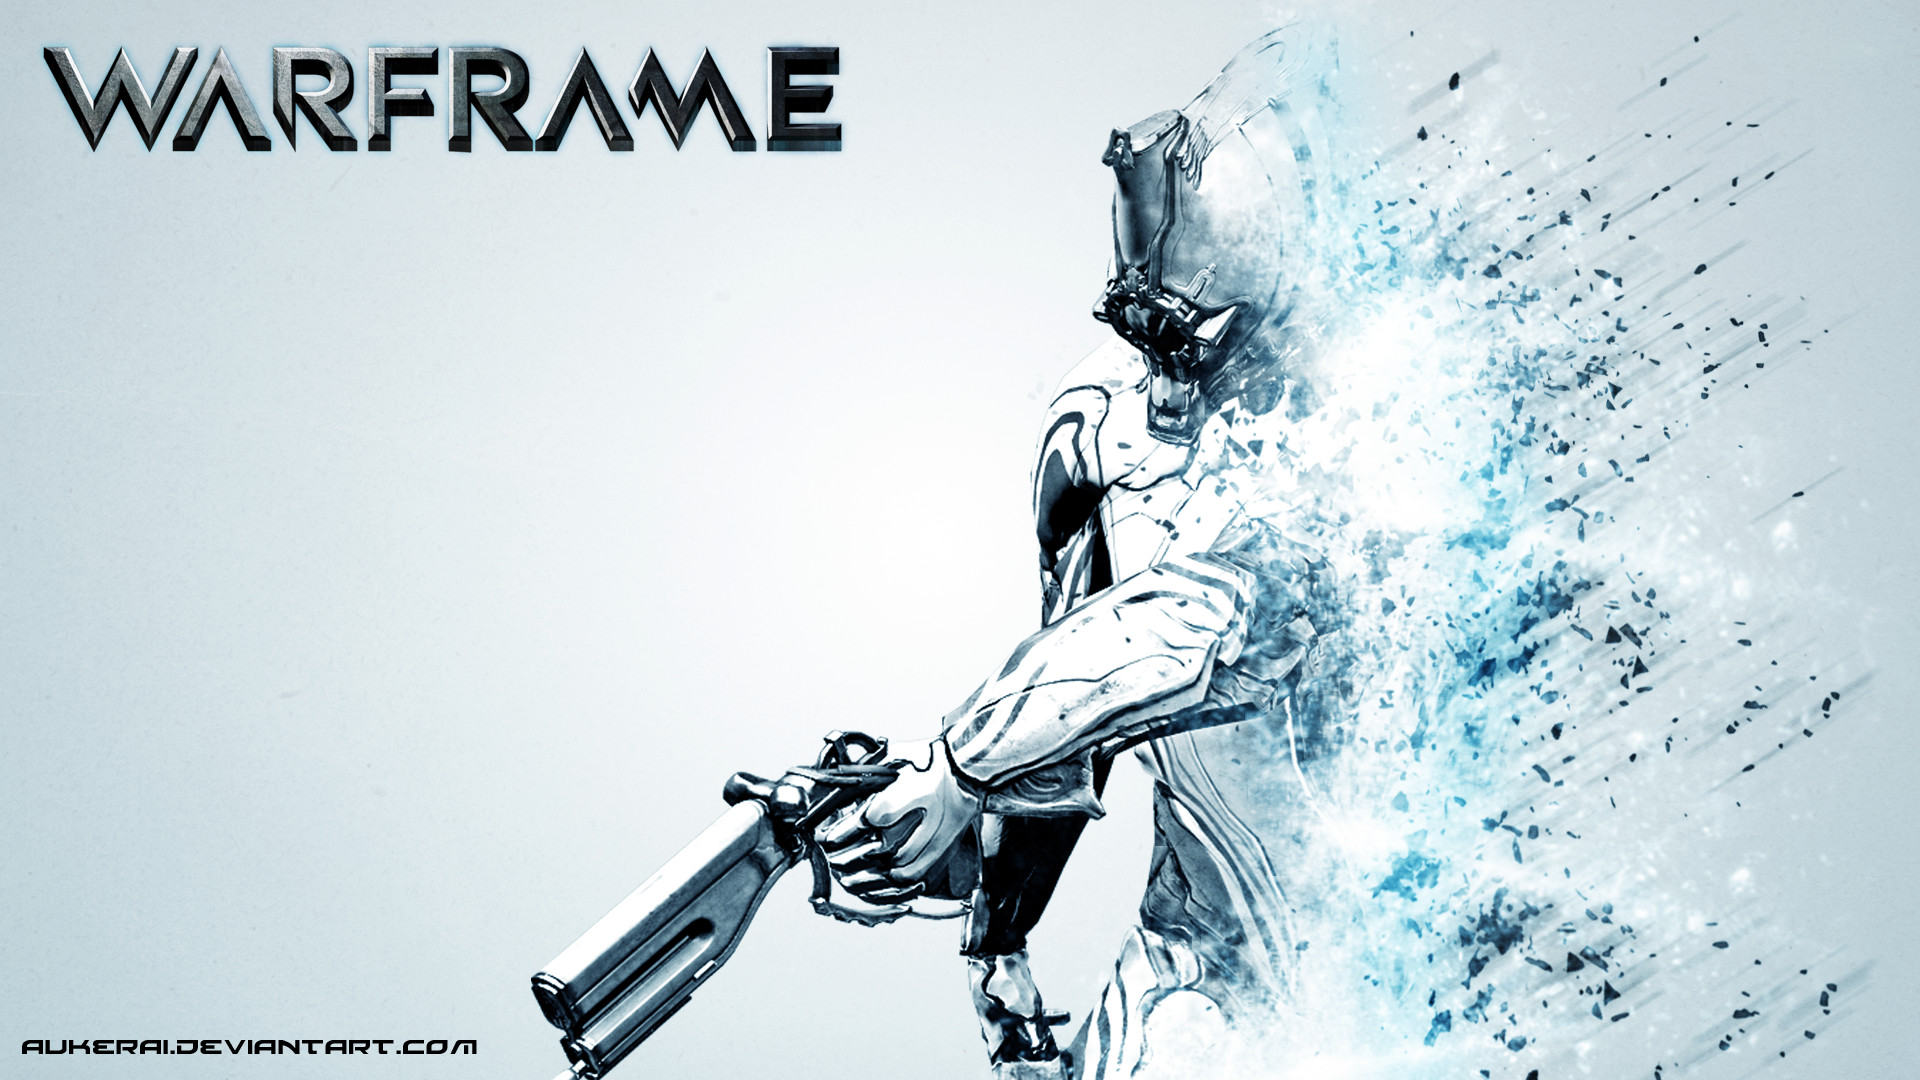 1920x1080 Nice HD Wallpapers Collection of Warframe - , 05.26.14